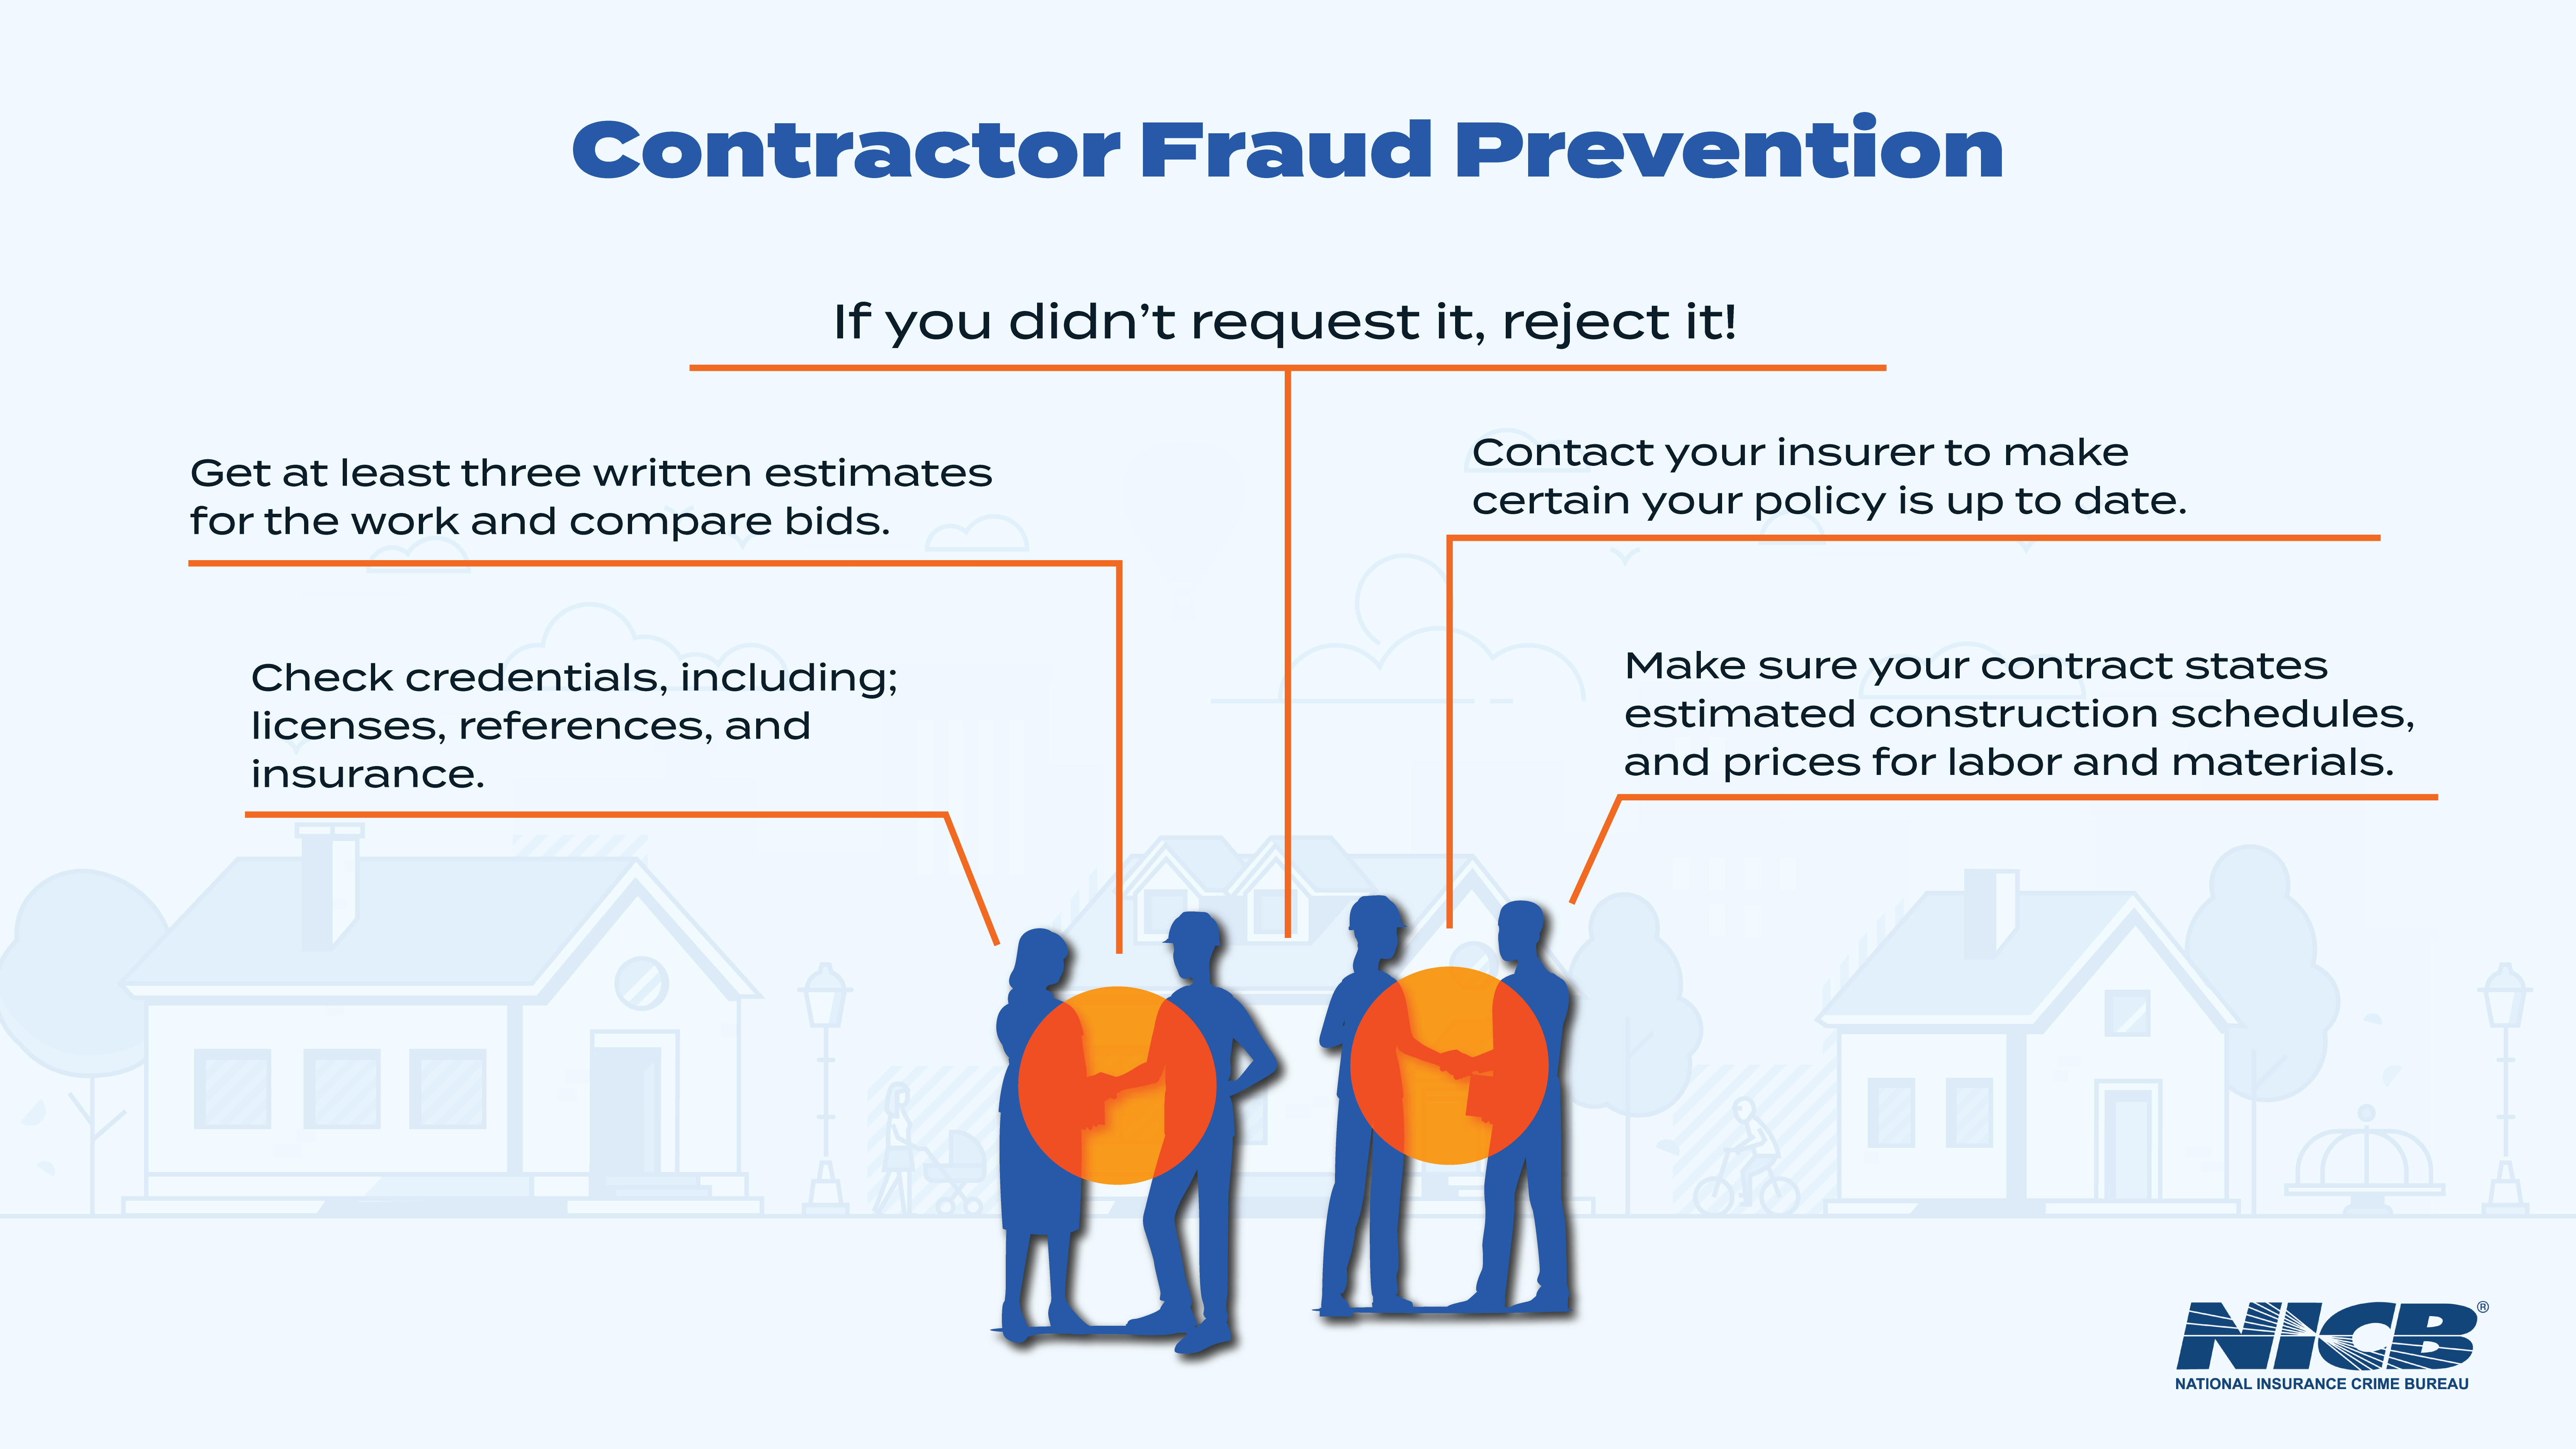 Contractor Fraud Prevention Tips